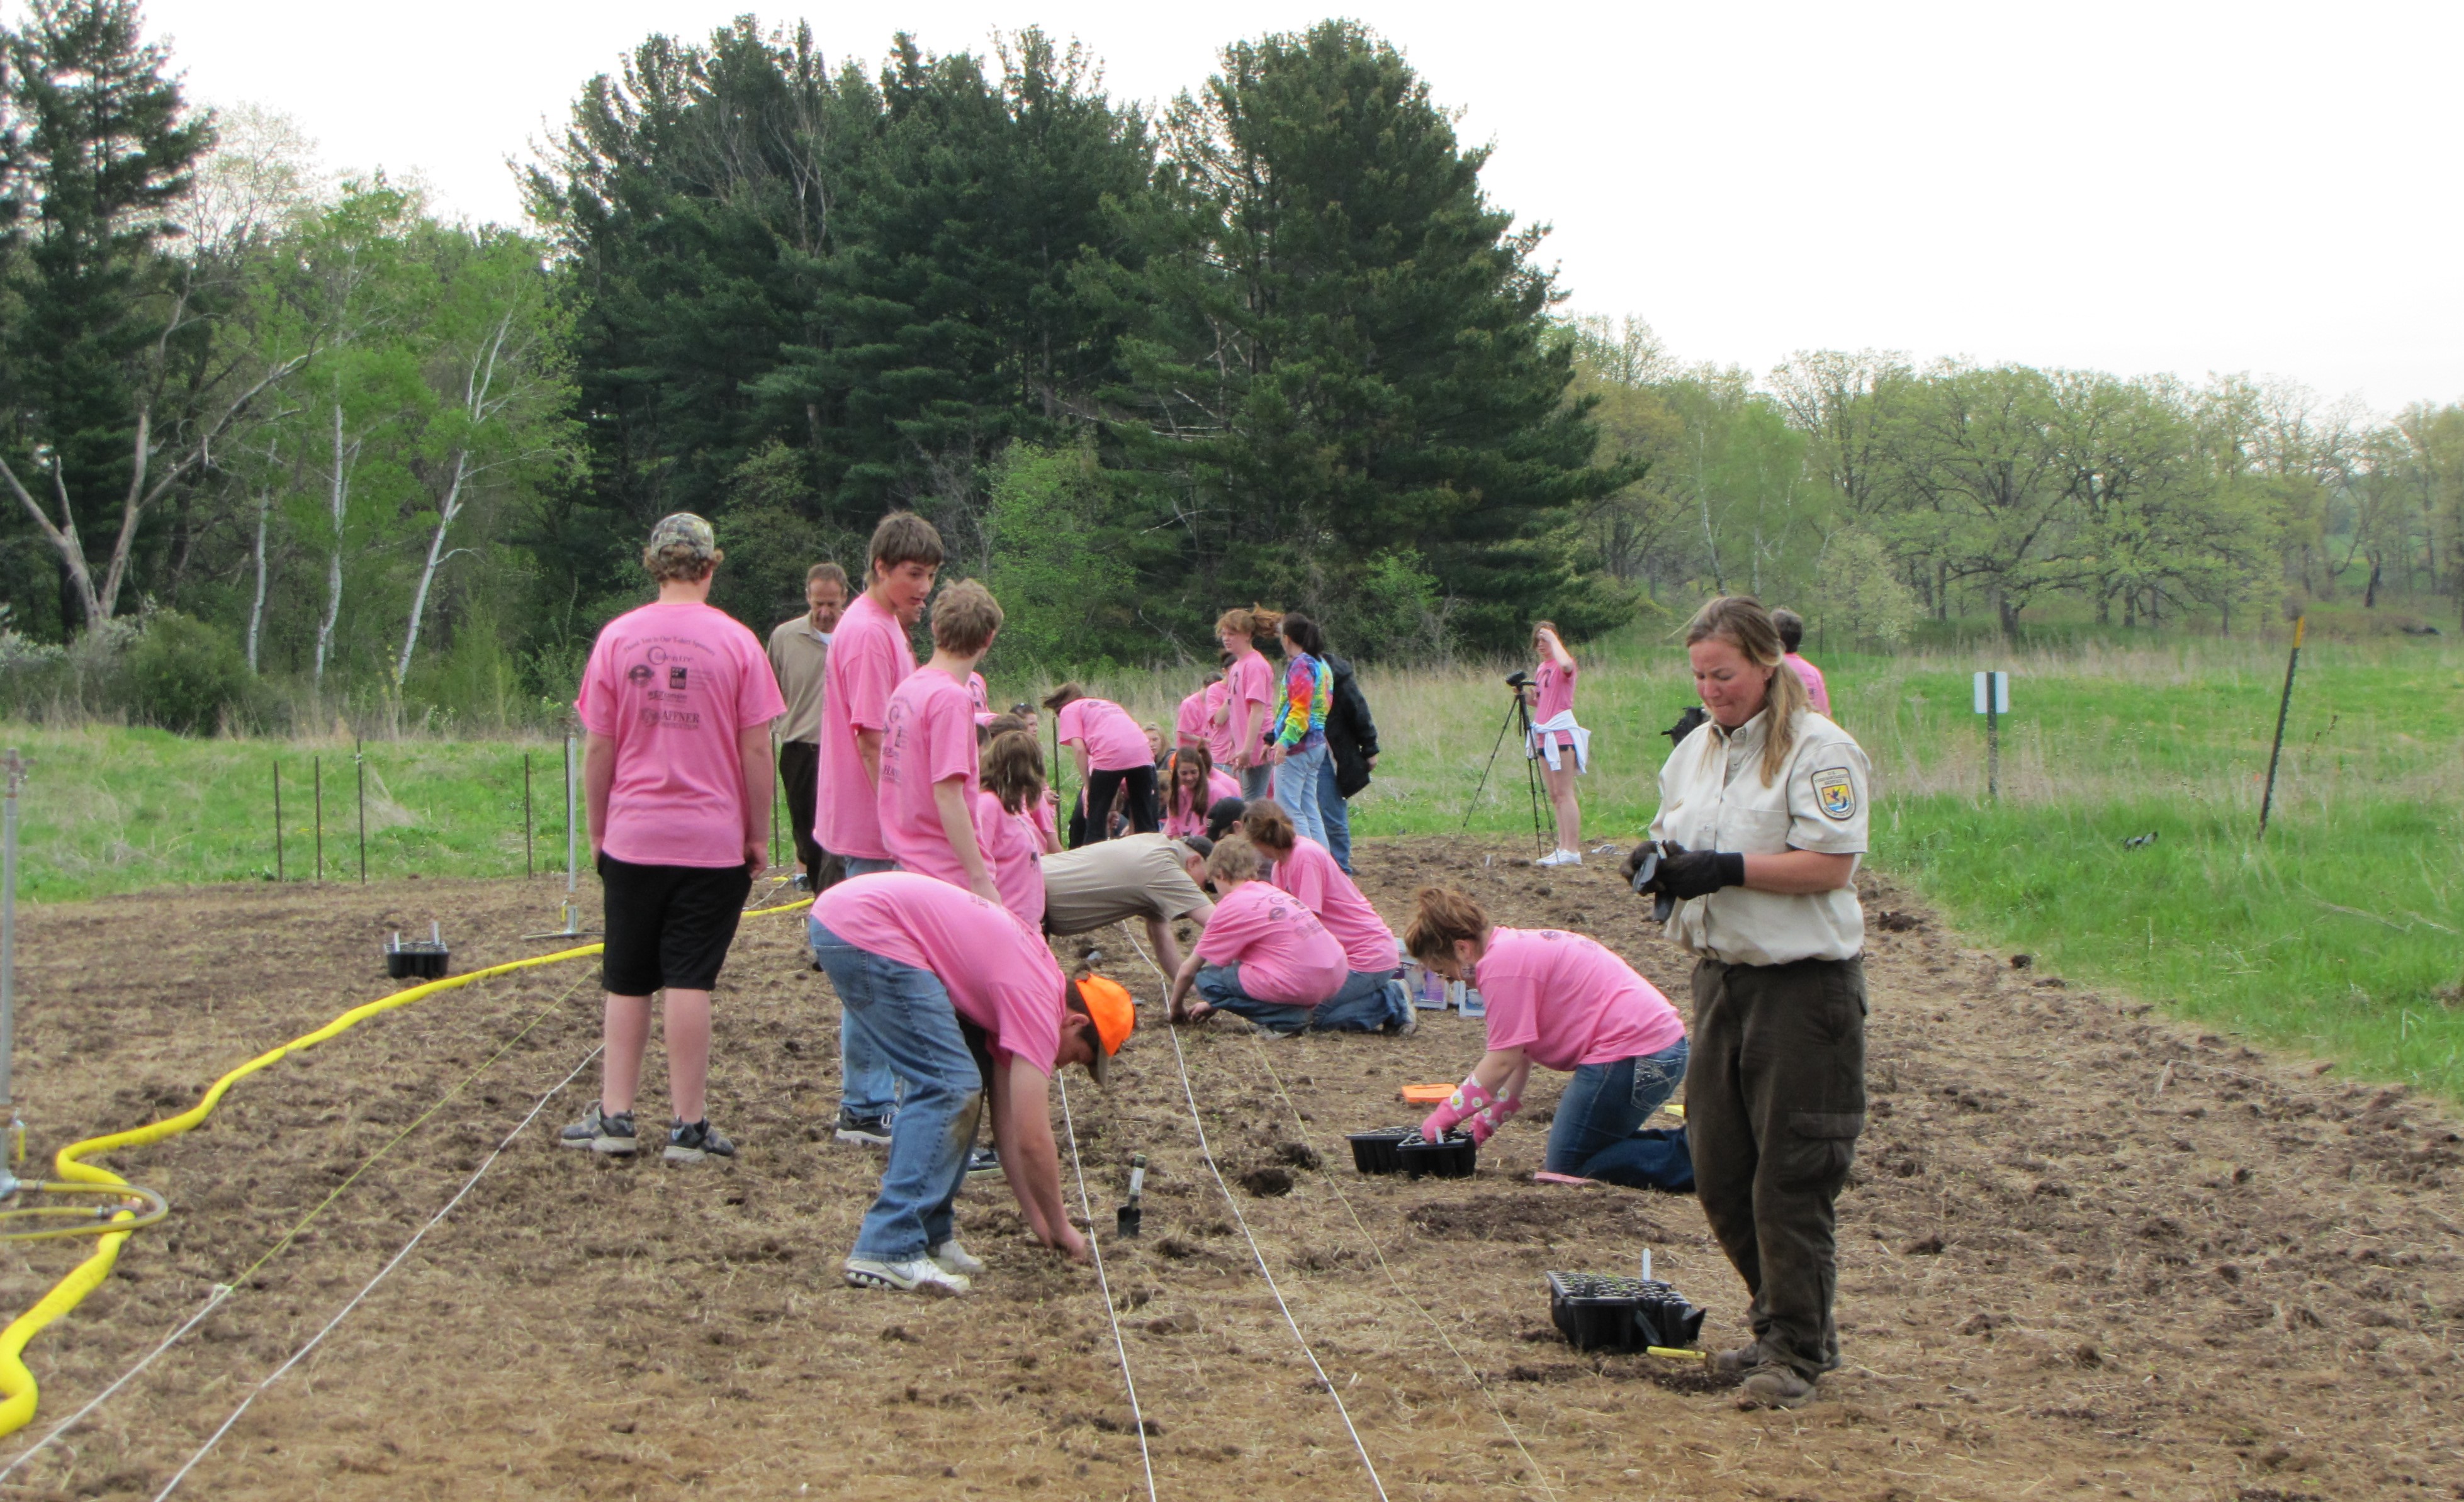 A group of people and a person in a brown uniform are working in a field